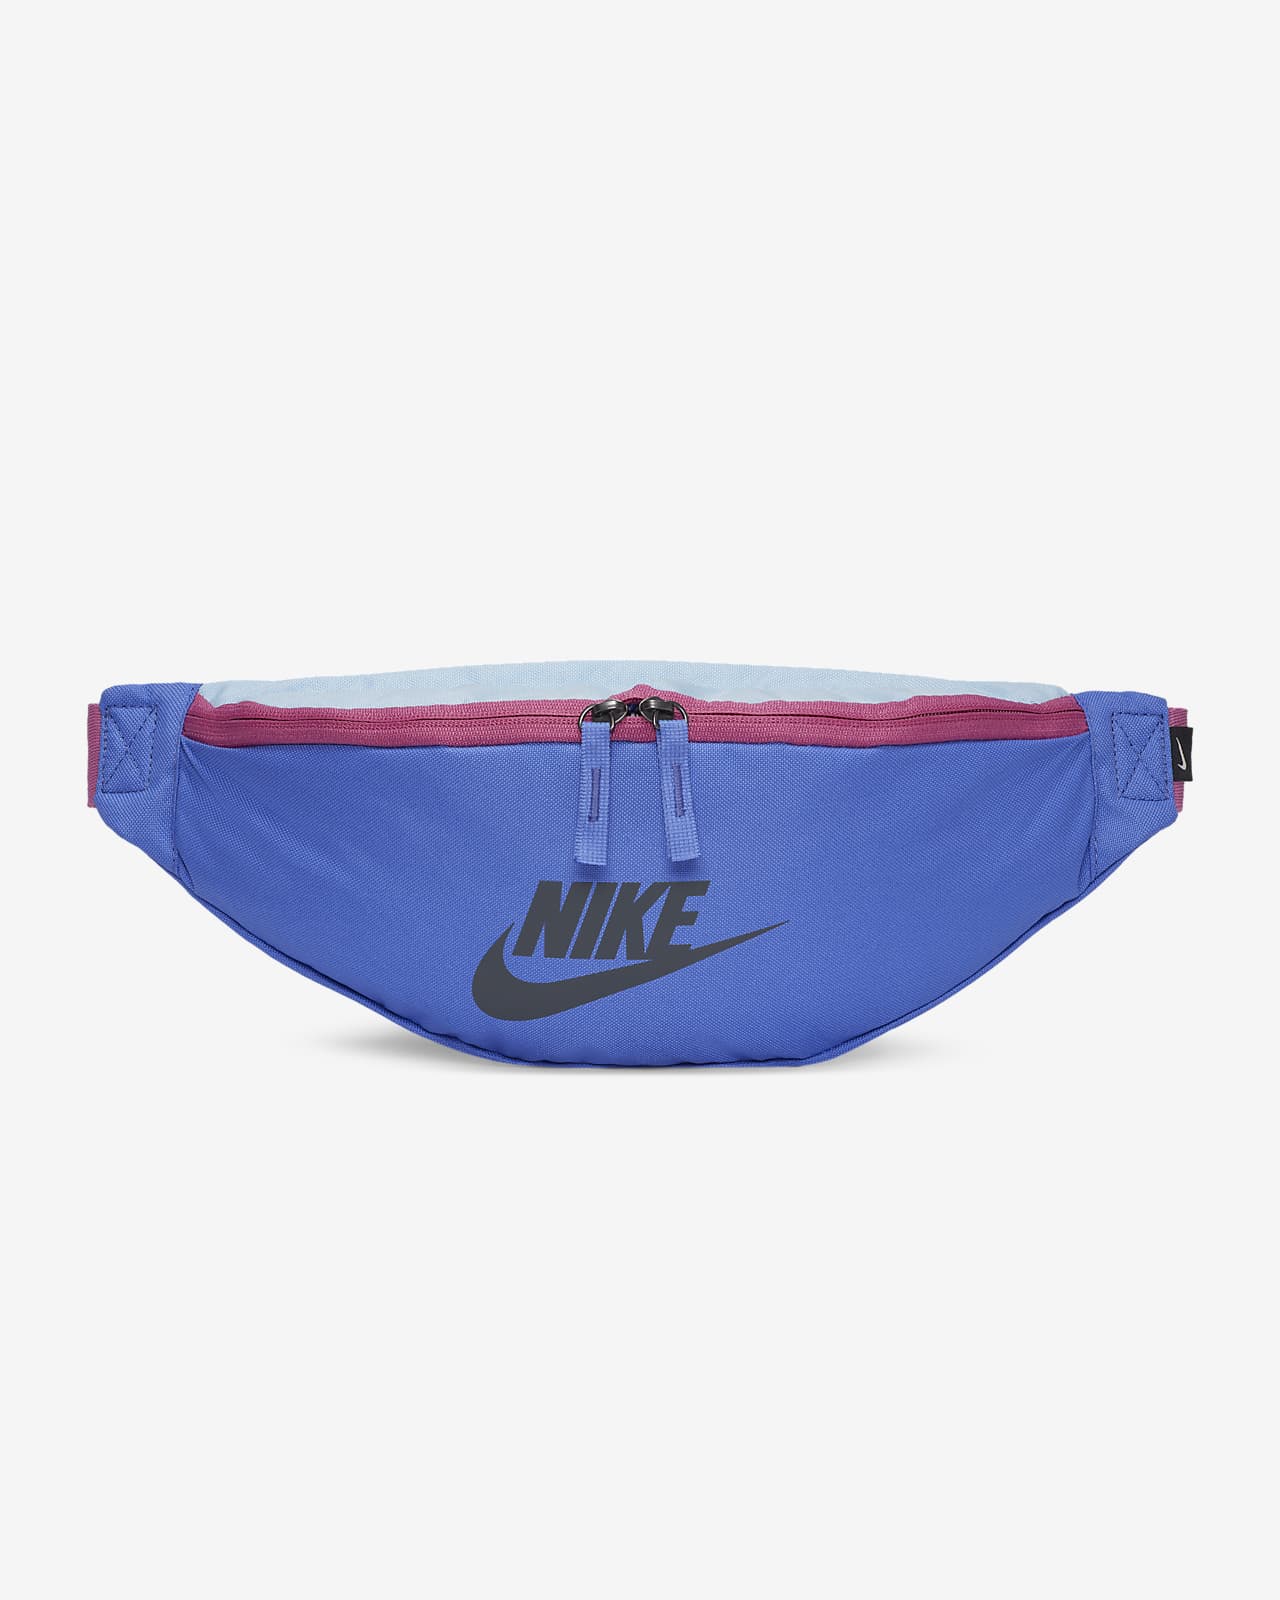 nike heritage hip pack review